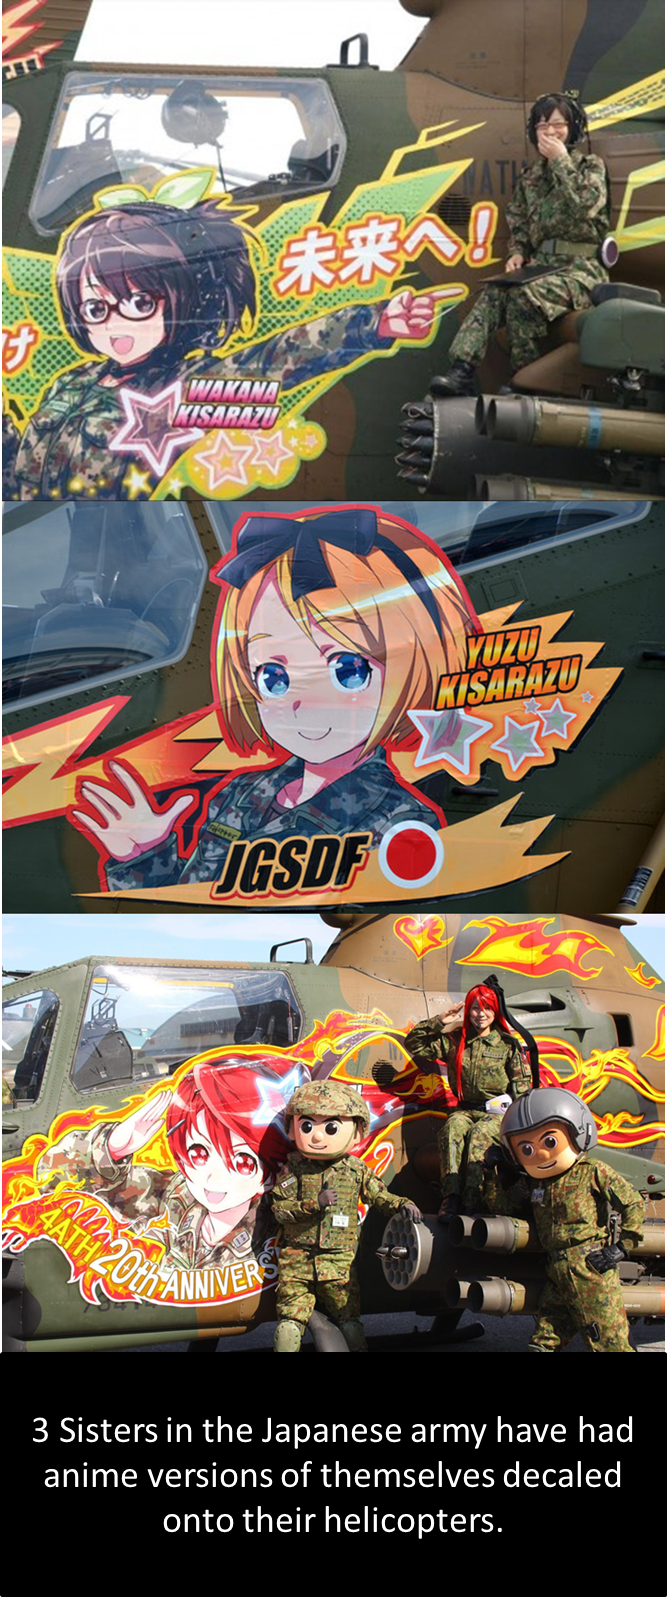 Welcome to Japan. Little bit compiled by me, sorry I couldn't Find any pictures of the middle girl with her chopper or any pictures of the fourth chopper Sauce: